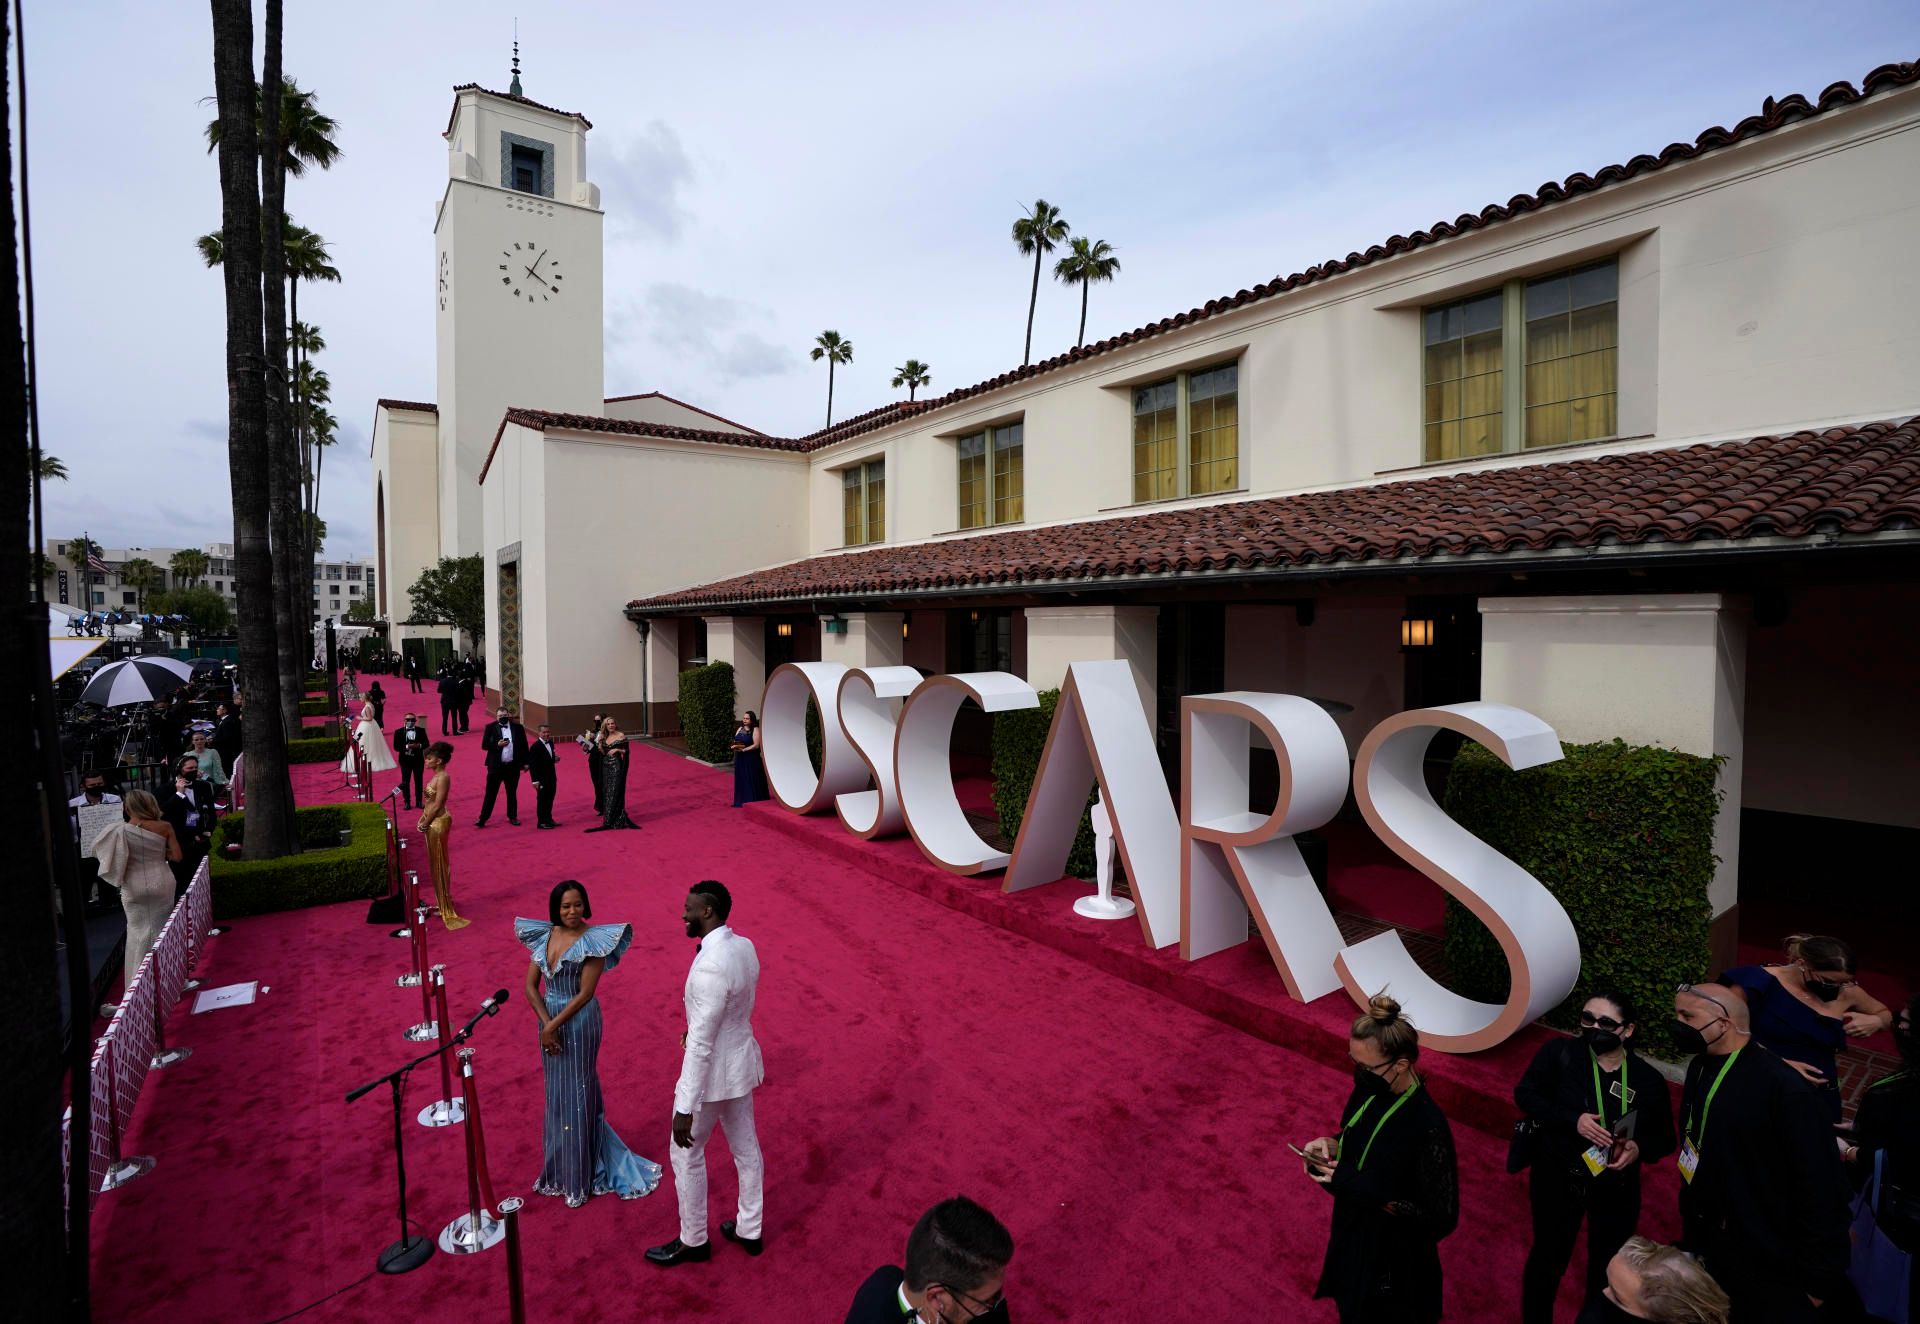 Oscars 2021: behind the triumph of "Nomadland", a ceremony under the sign of diversity